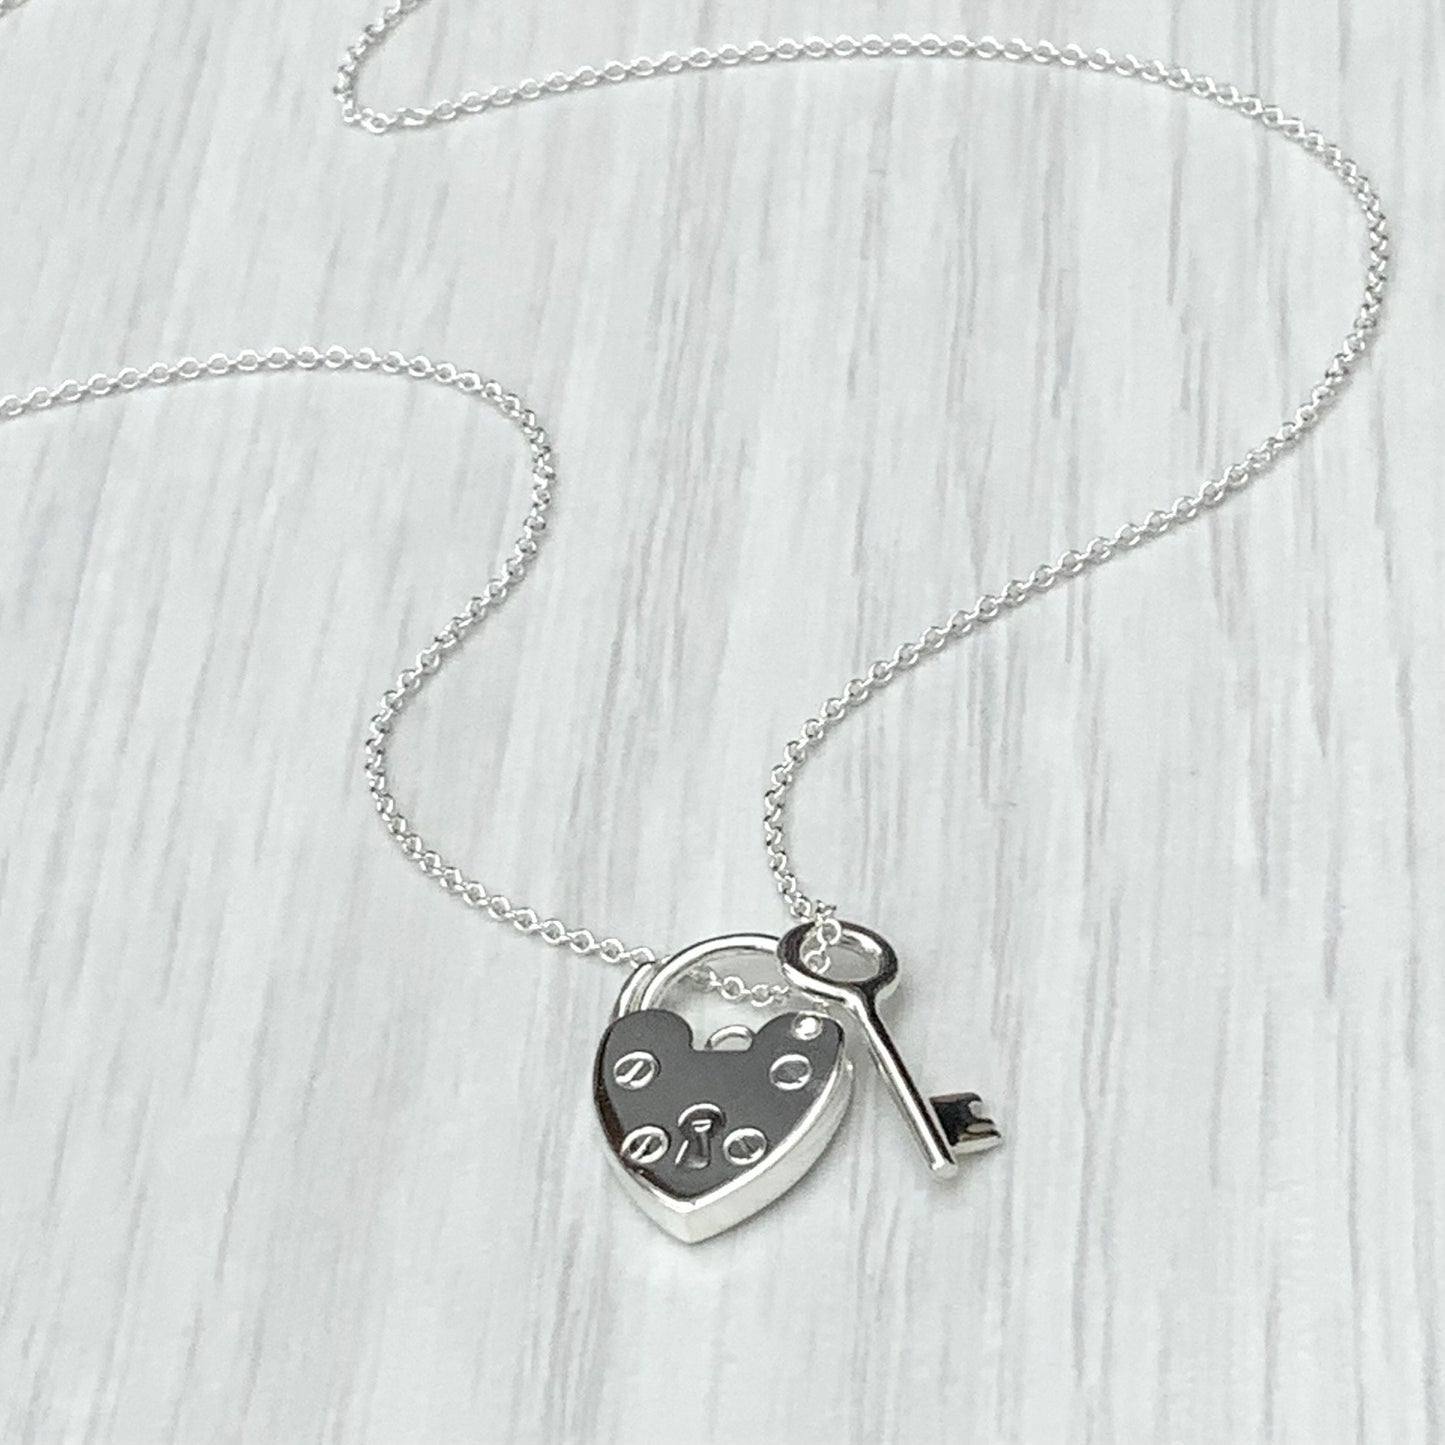 Solid silver heart padlock and dainty key charm pendant on a trace chain